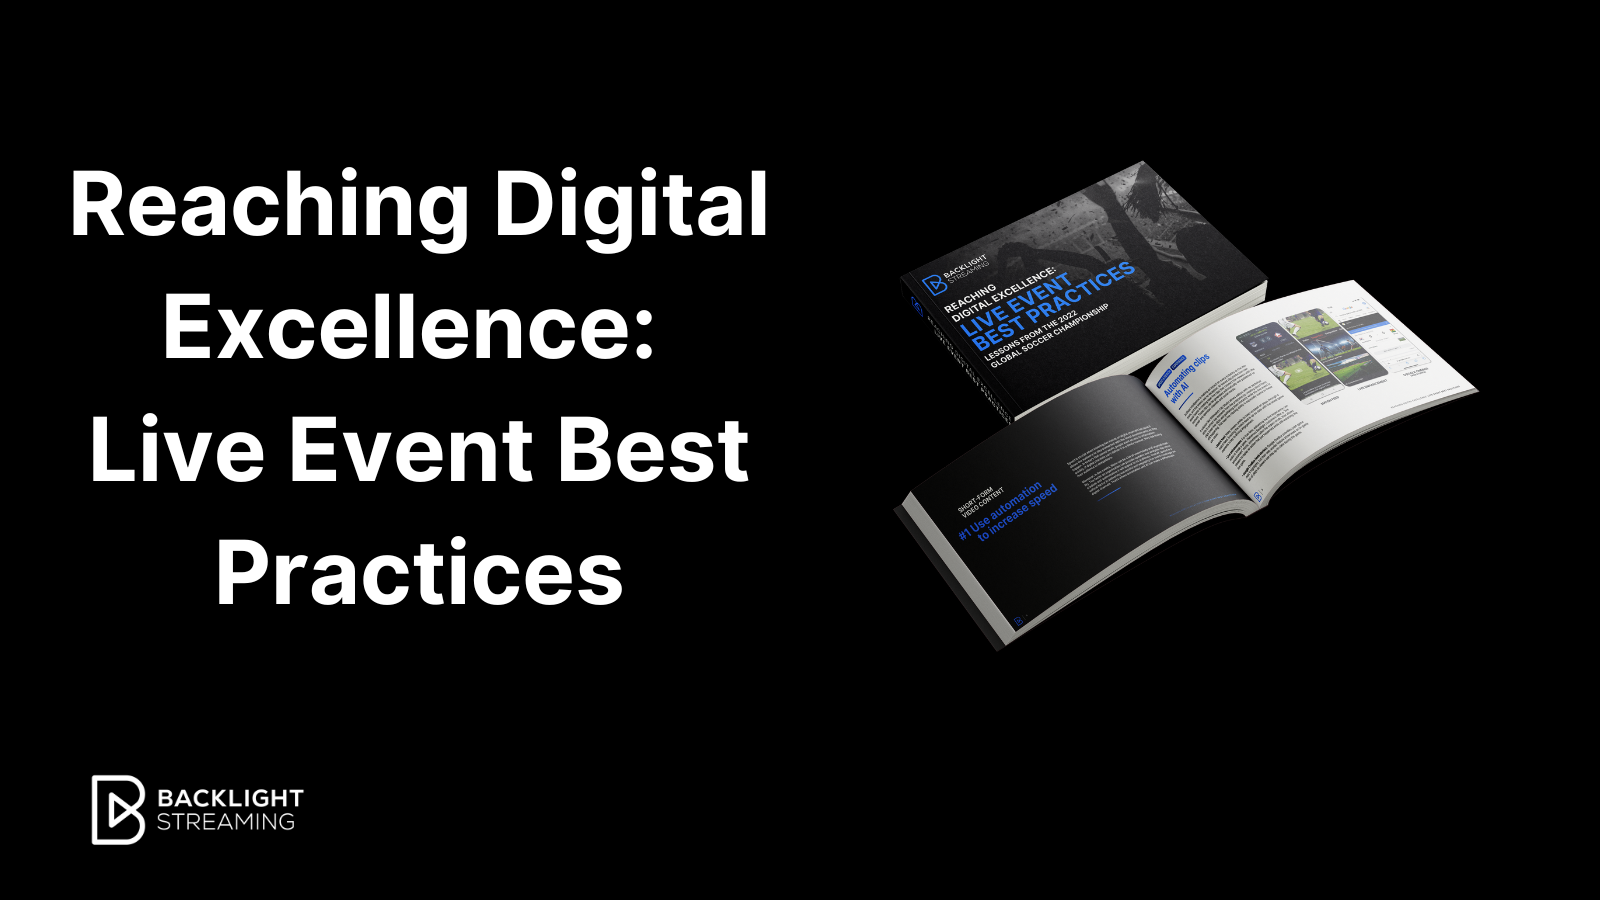 Reaching Digital Excellence: Live Event Best Practices